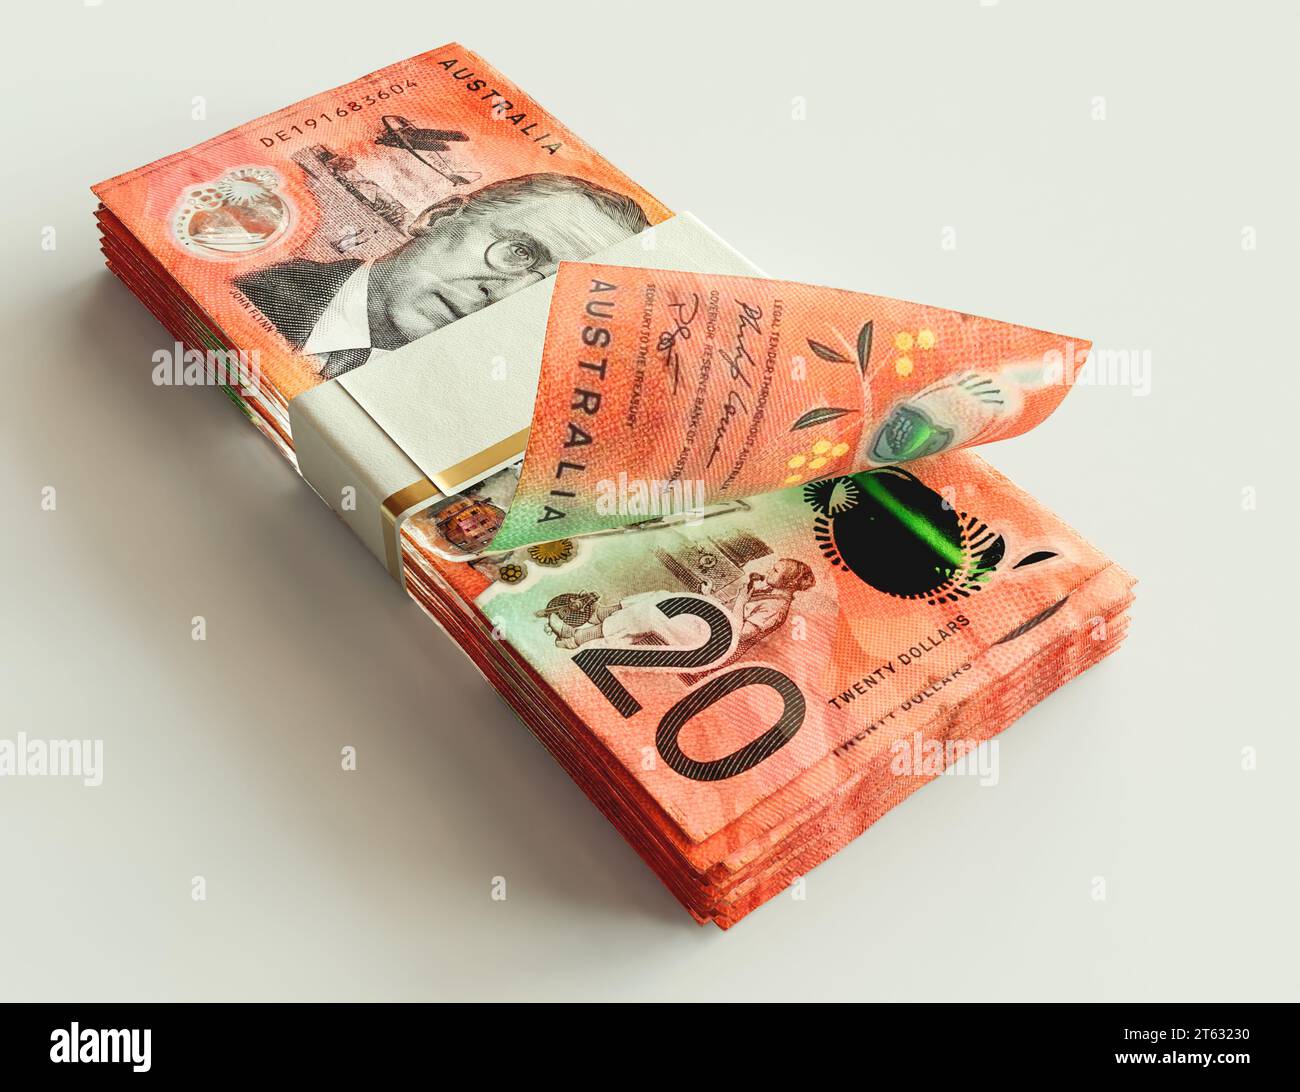 A bundled wad of Australlia Dollar banknotes on an isolated light background - 3D render Stock Photo